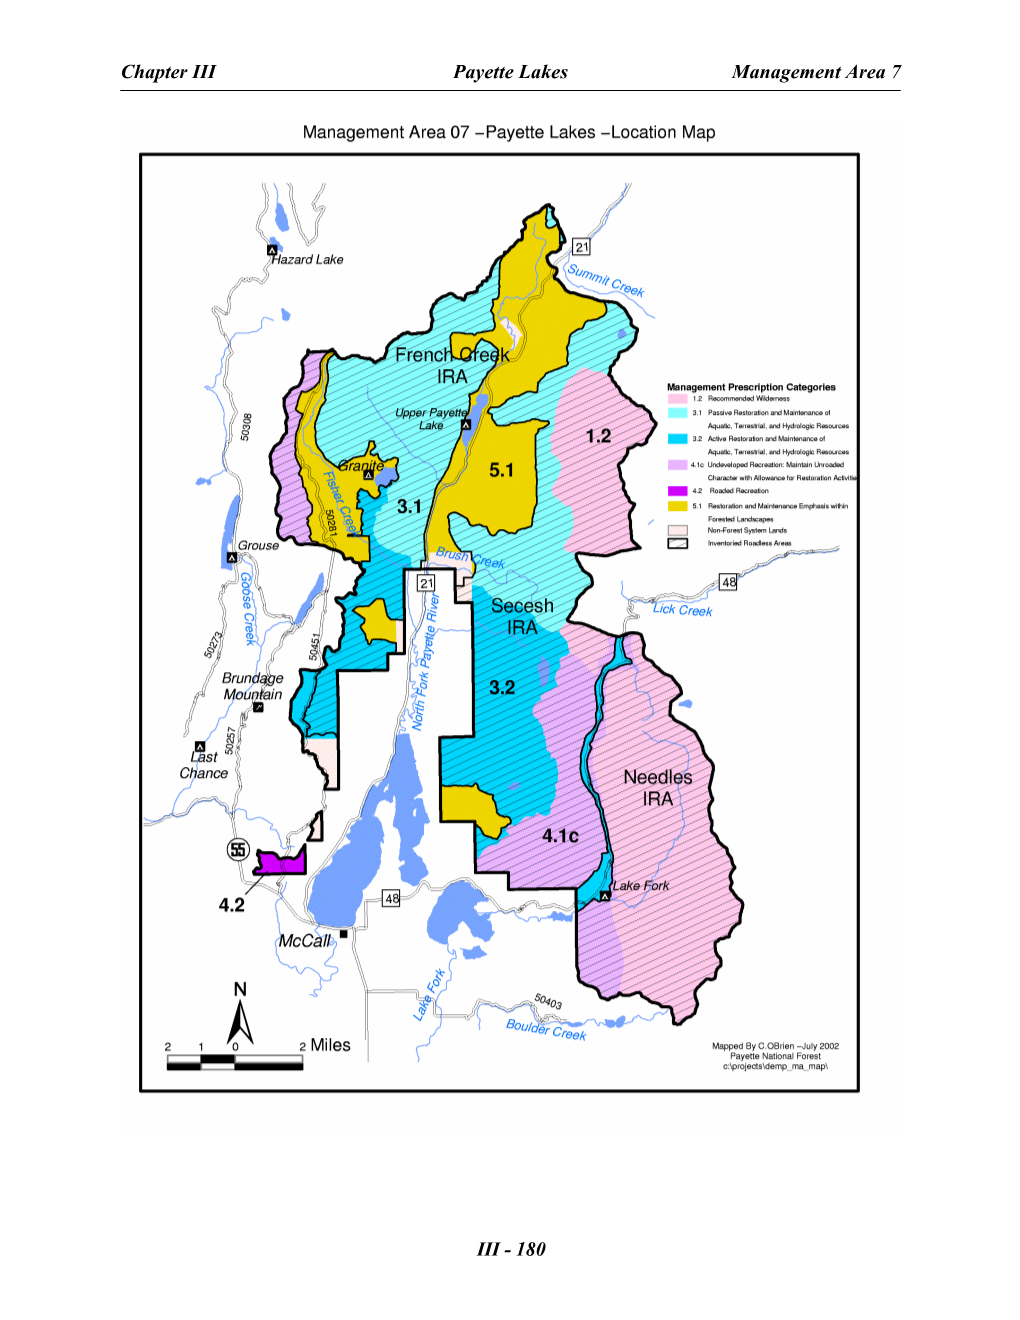 Chapter III Payette Lakes Management Area 7